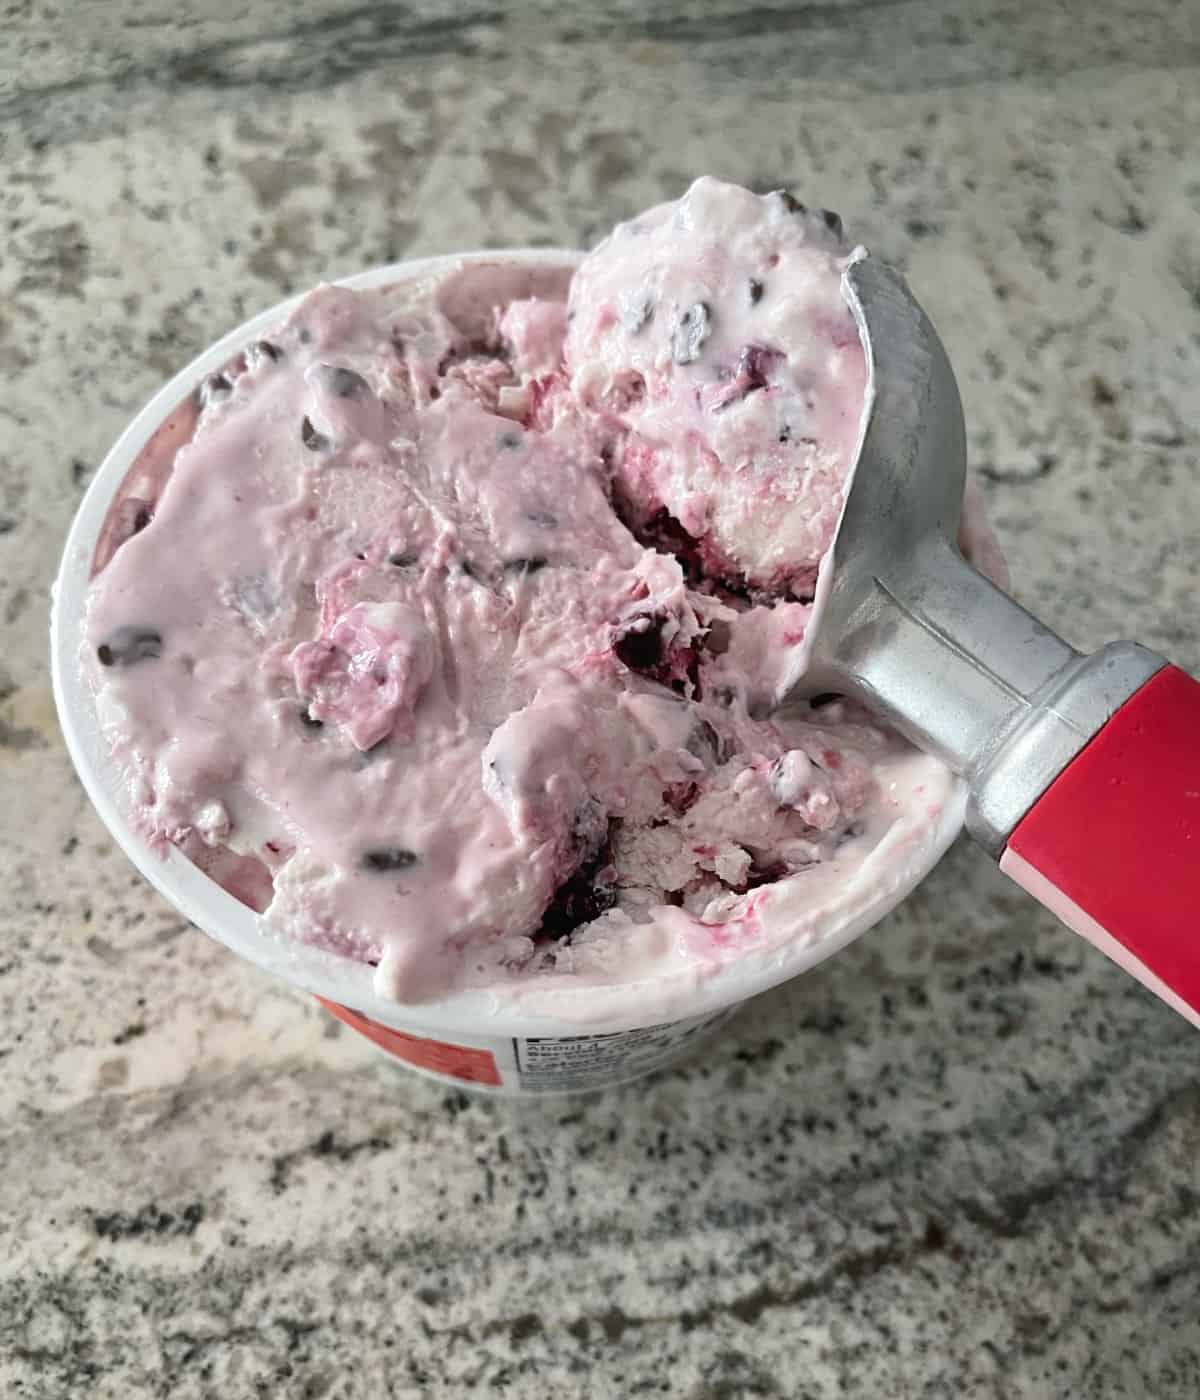 Picking cottage cheese ice cream with chocolate chips and cherries.